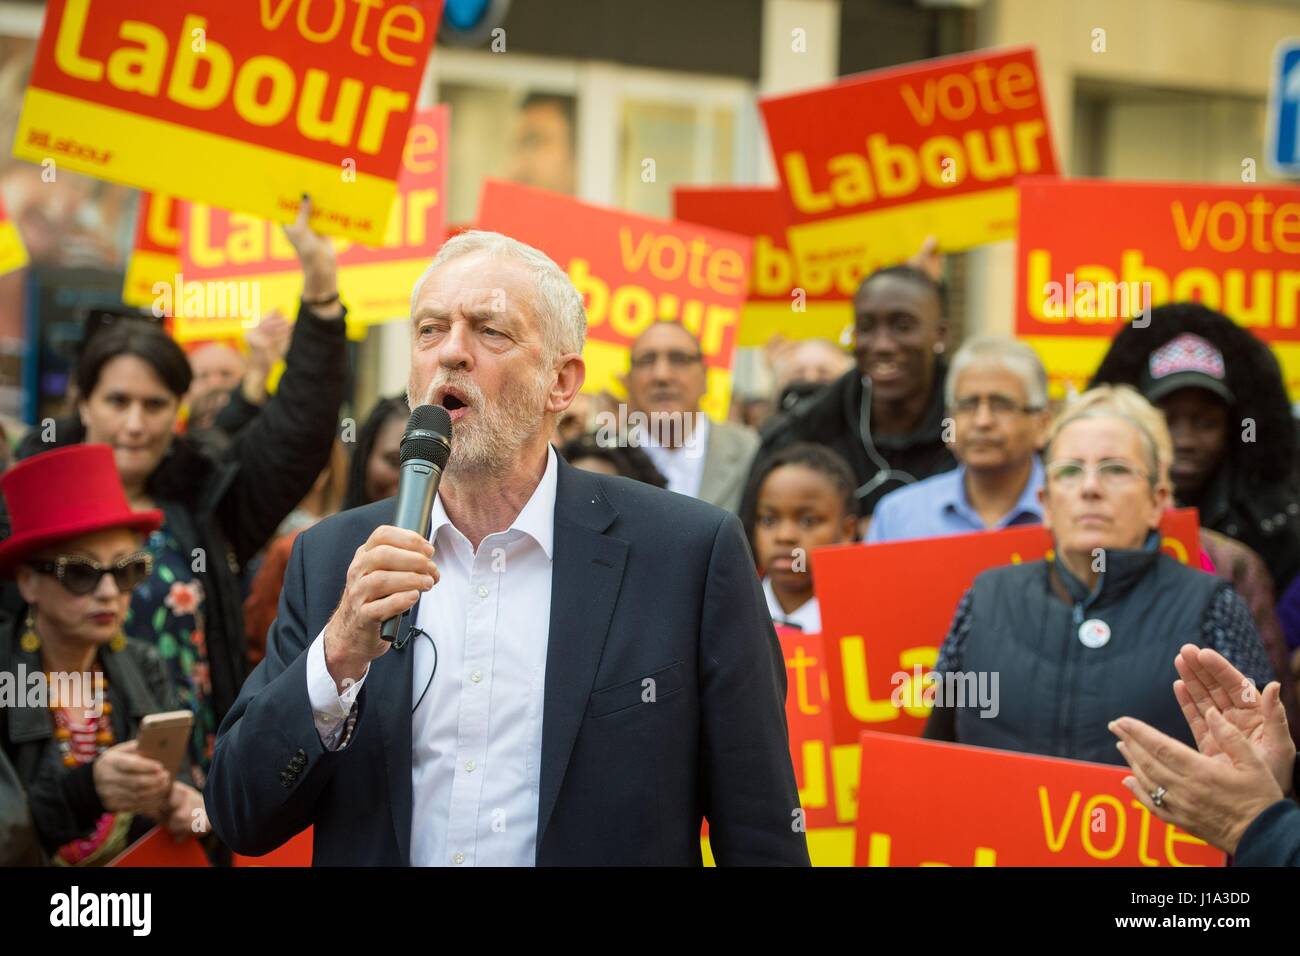 Labour leader Jeremy Corbyn delivers a stump speech to Labour activists at Barclays in Croydon. Stock Photo